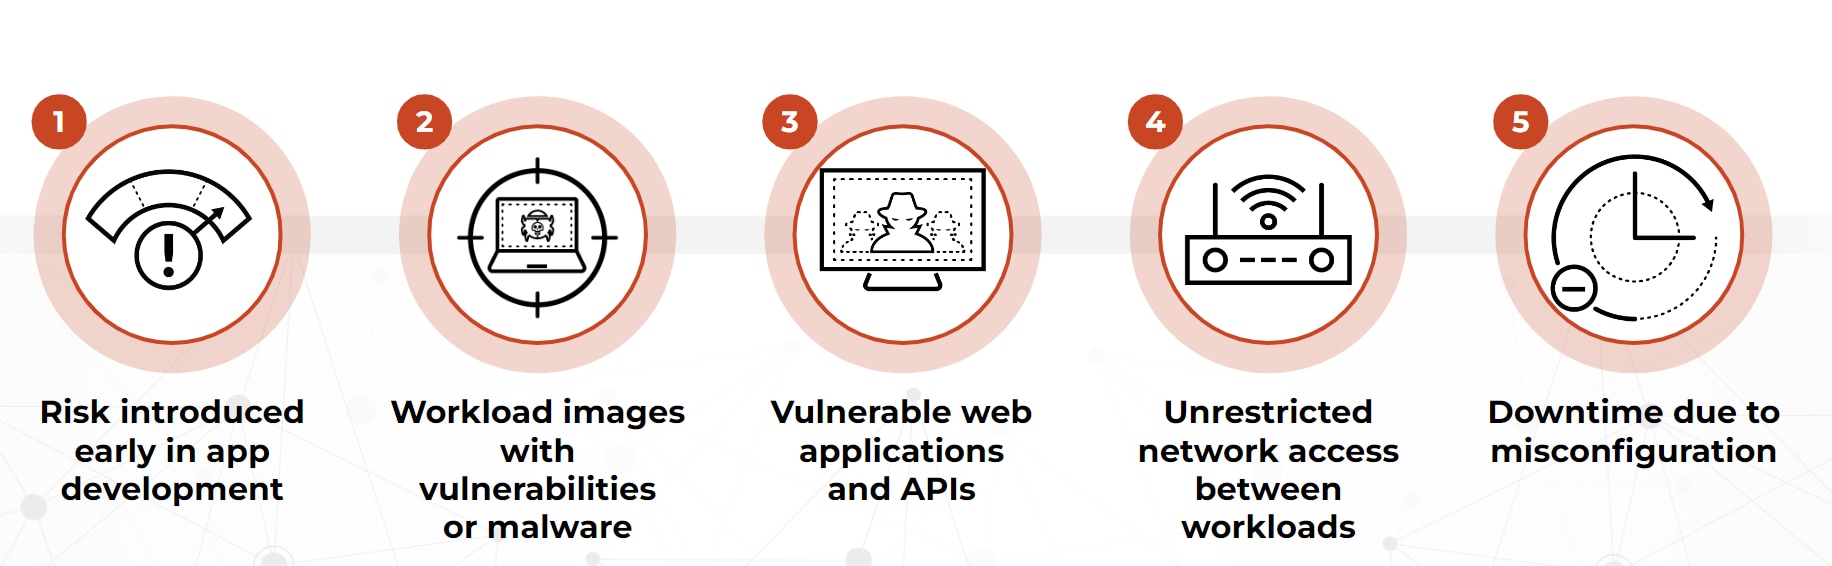 Risk introduced early, workload images with vulnerabilities, vulnerable web apps, unrestricted network access, downtime due to misconfiguration. 